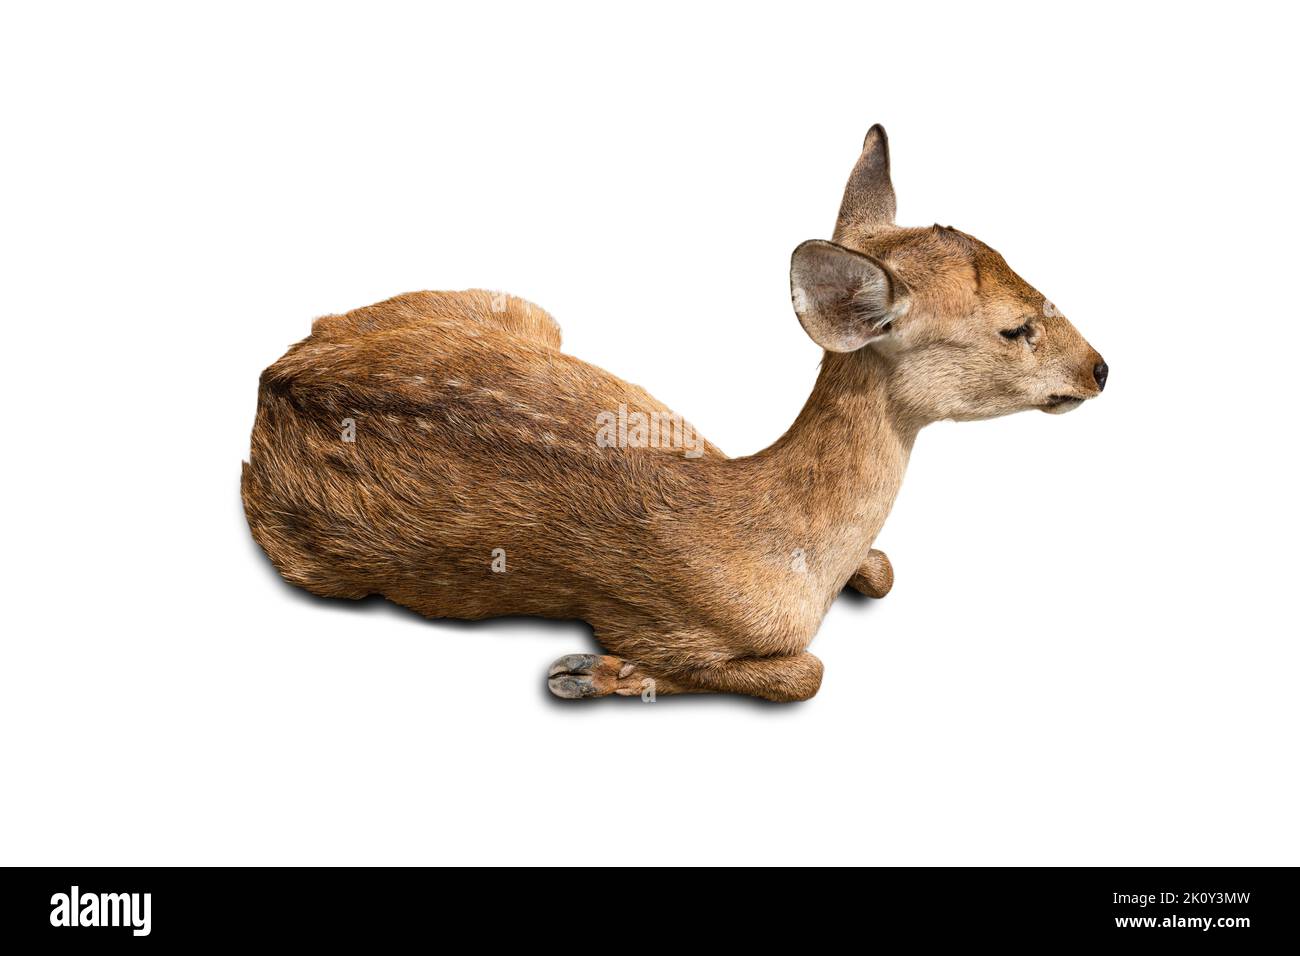 Deer sitting against isolated on white background. Stock Photo